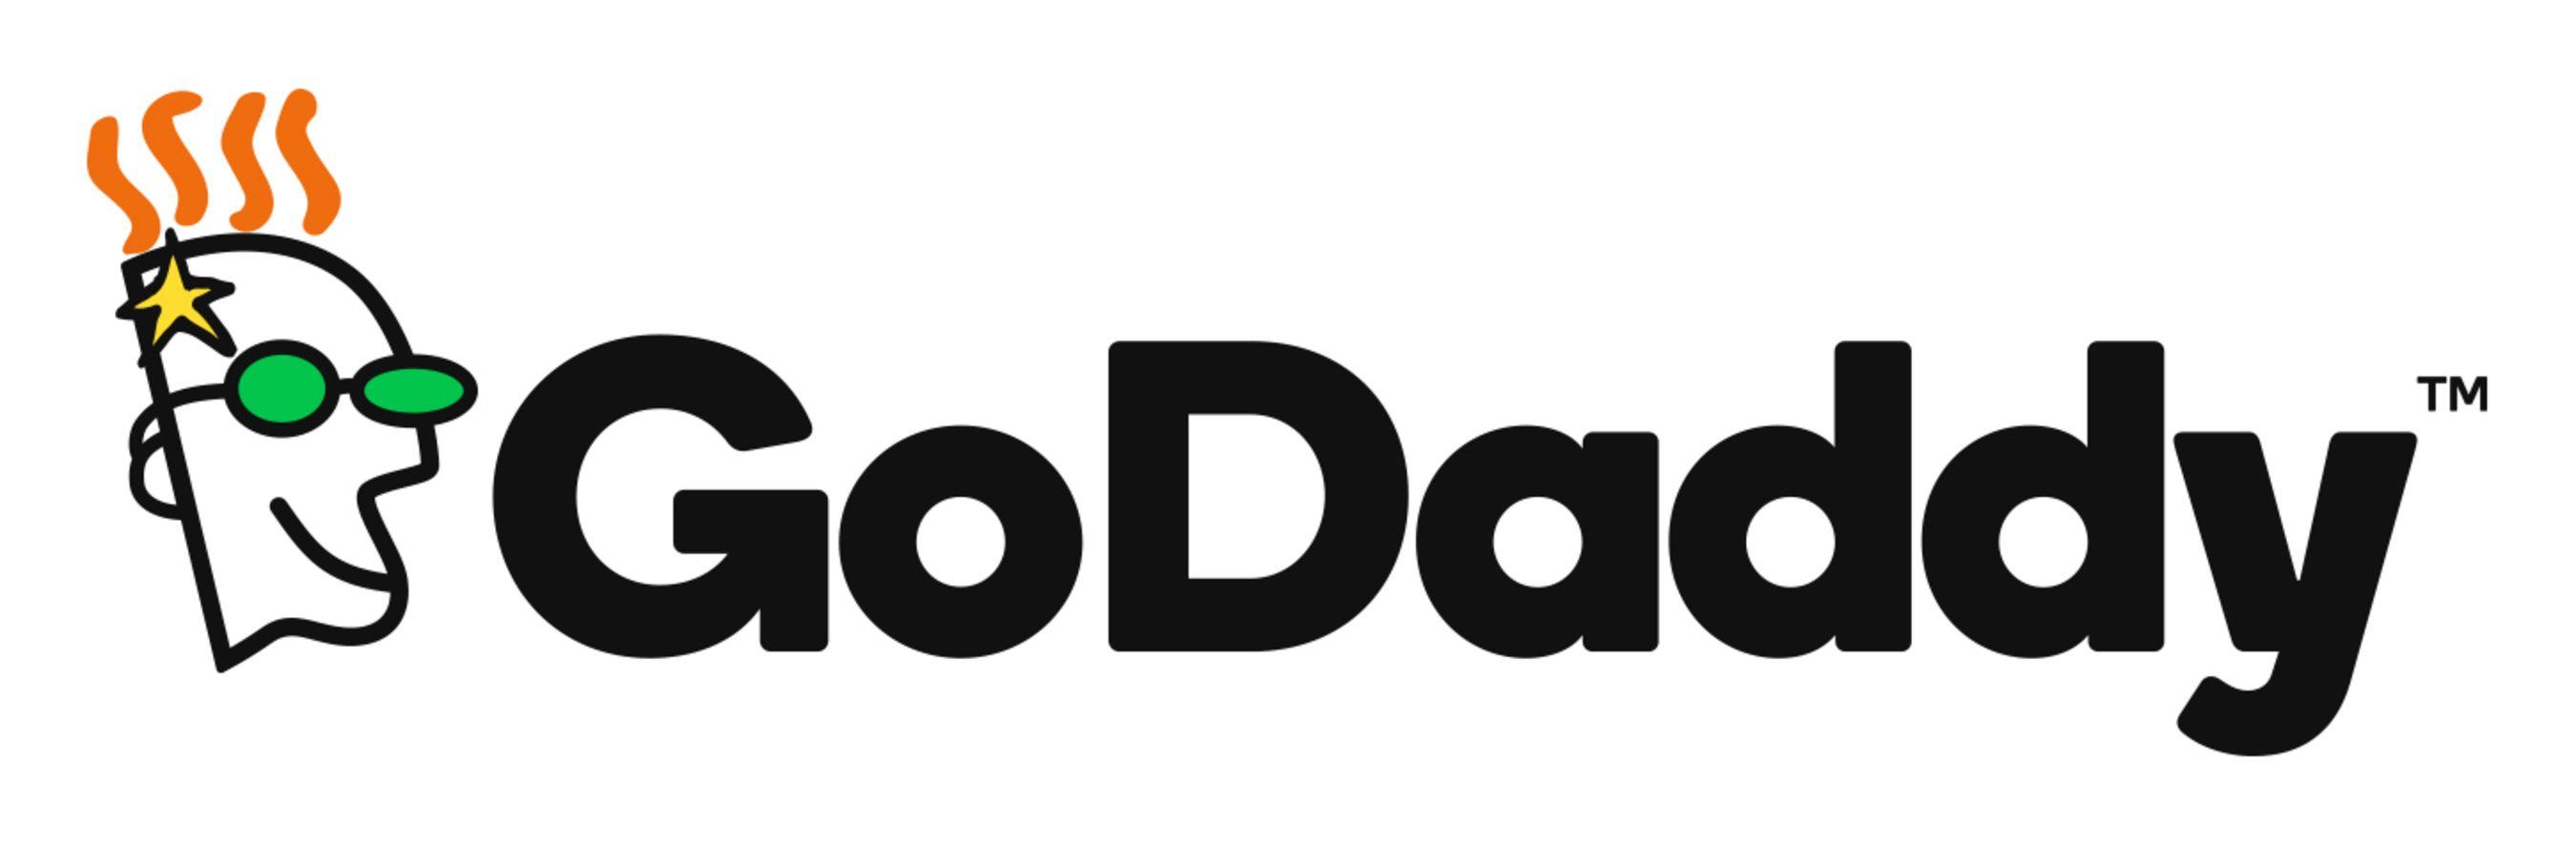 Godaddy Office 365 Logo - GoDaddy Announces Email Encryption And Email Archiving Features